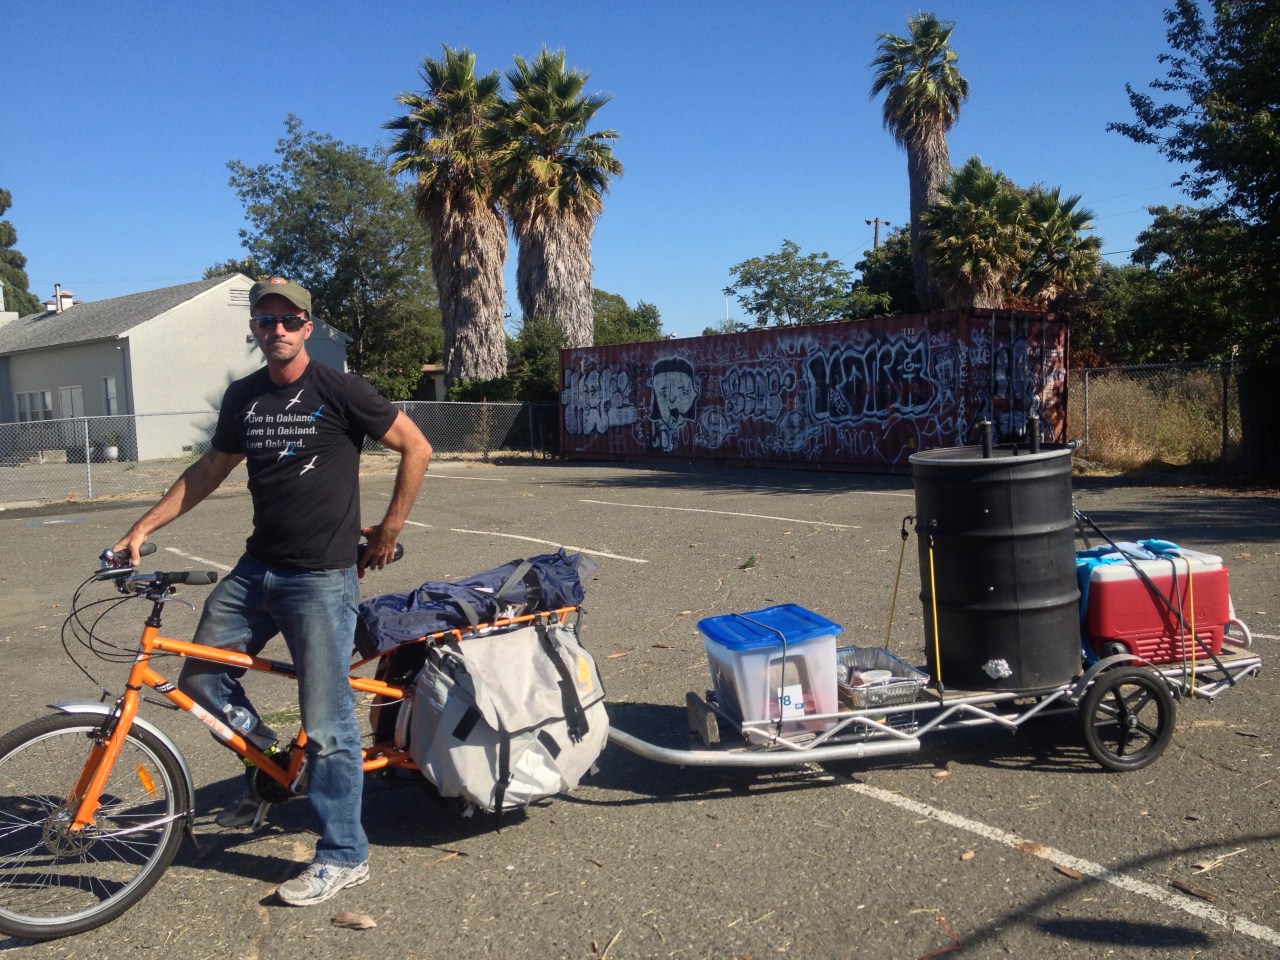 Dave with his bicycle BBQ rig in tow during an event in Oakland.